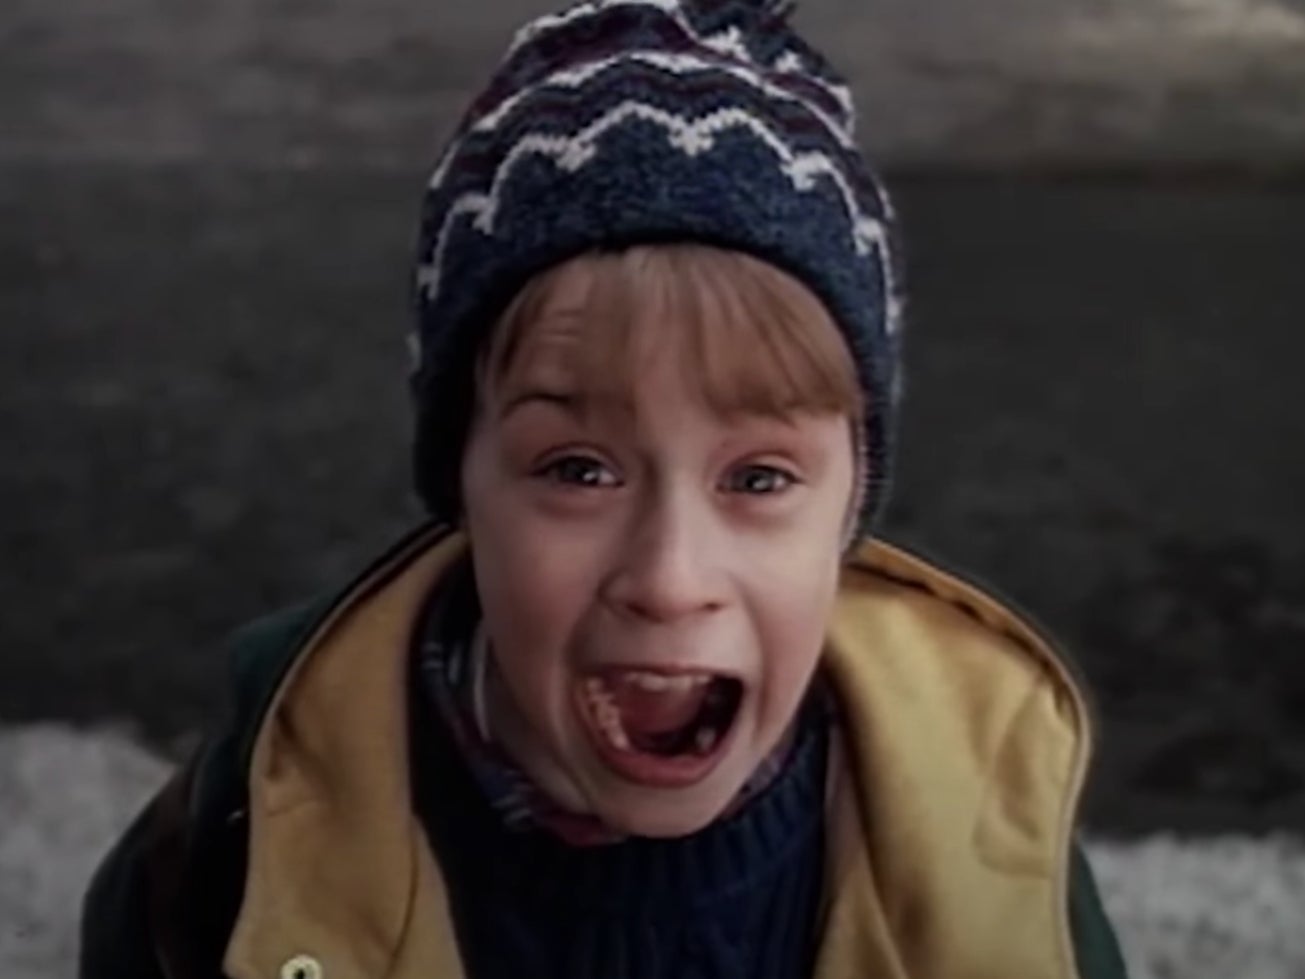 kevin home alone full movie english